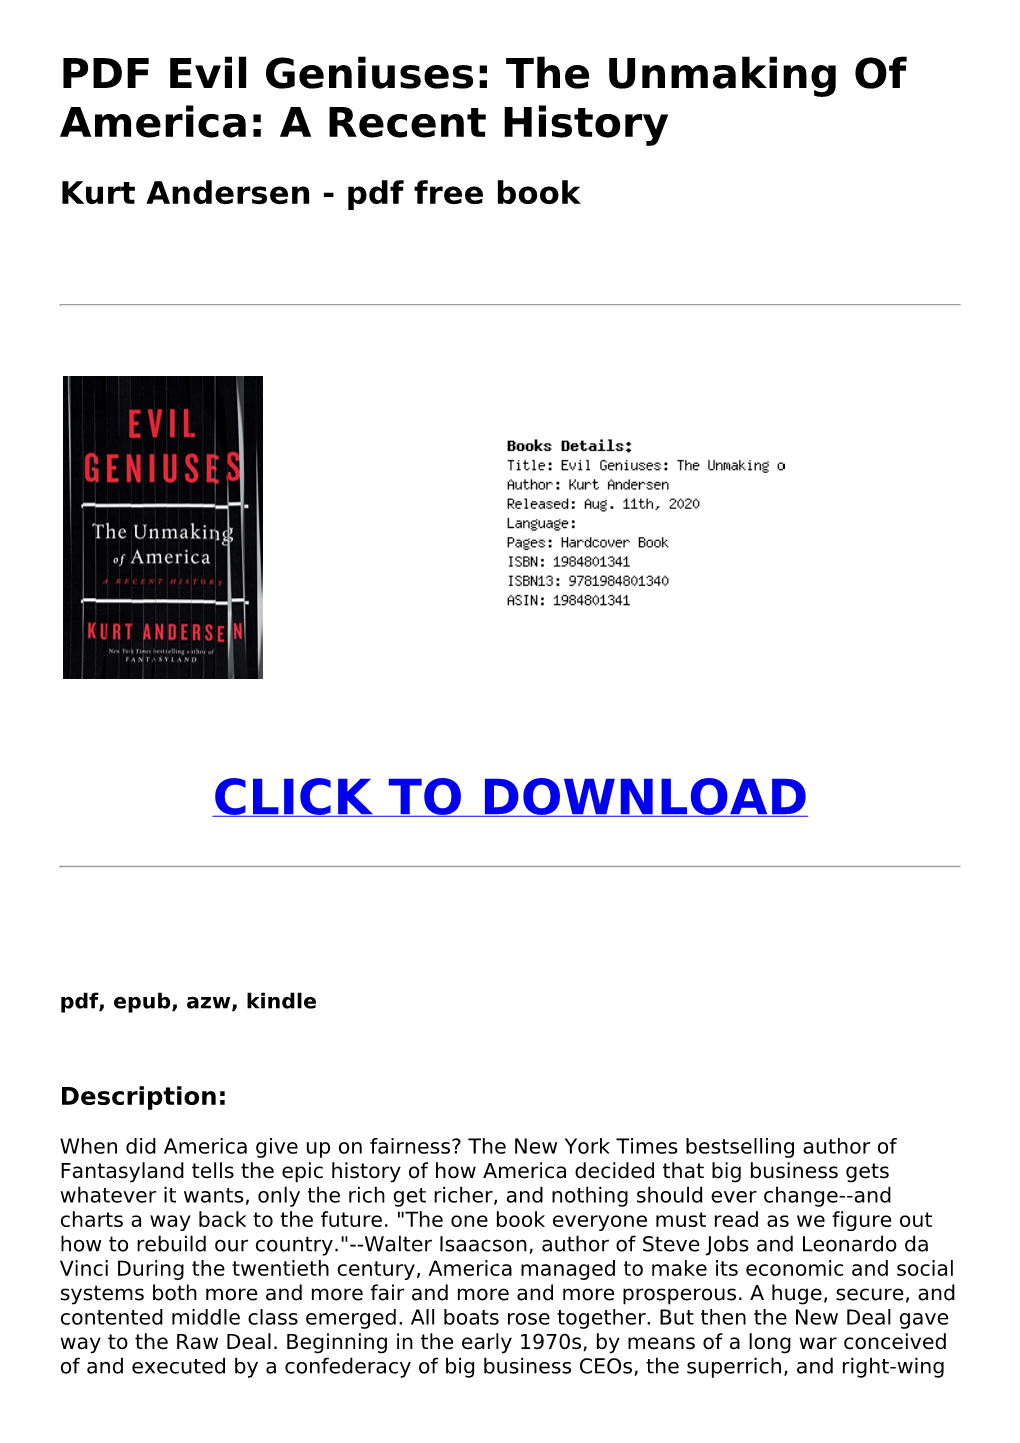 (7Be5e32) PDF Evil Geniuses: the Unmaking of America: a Recent